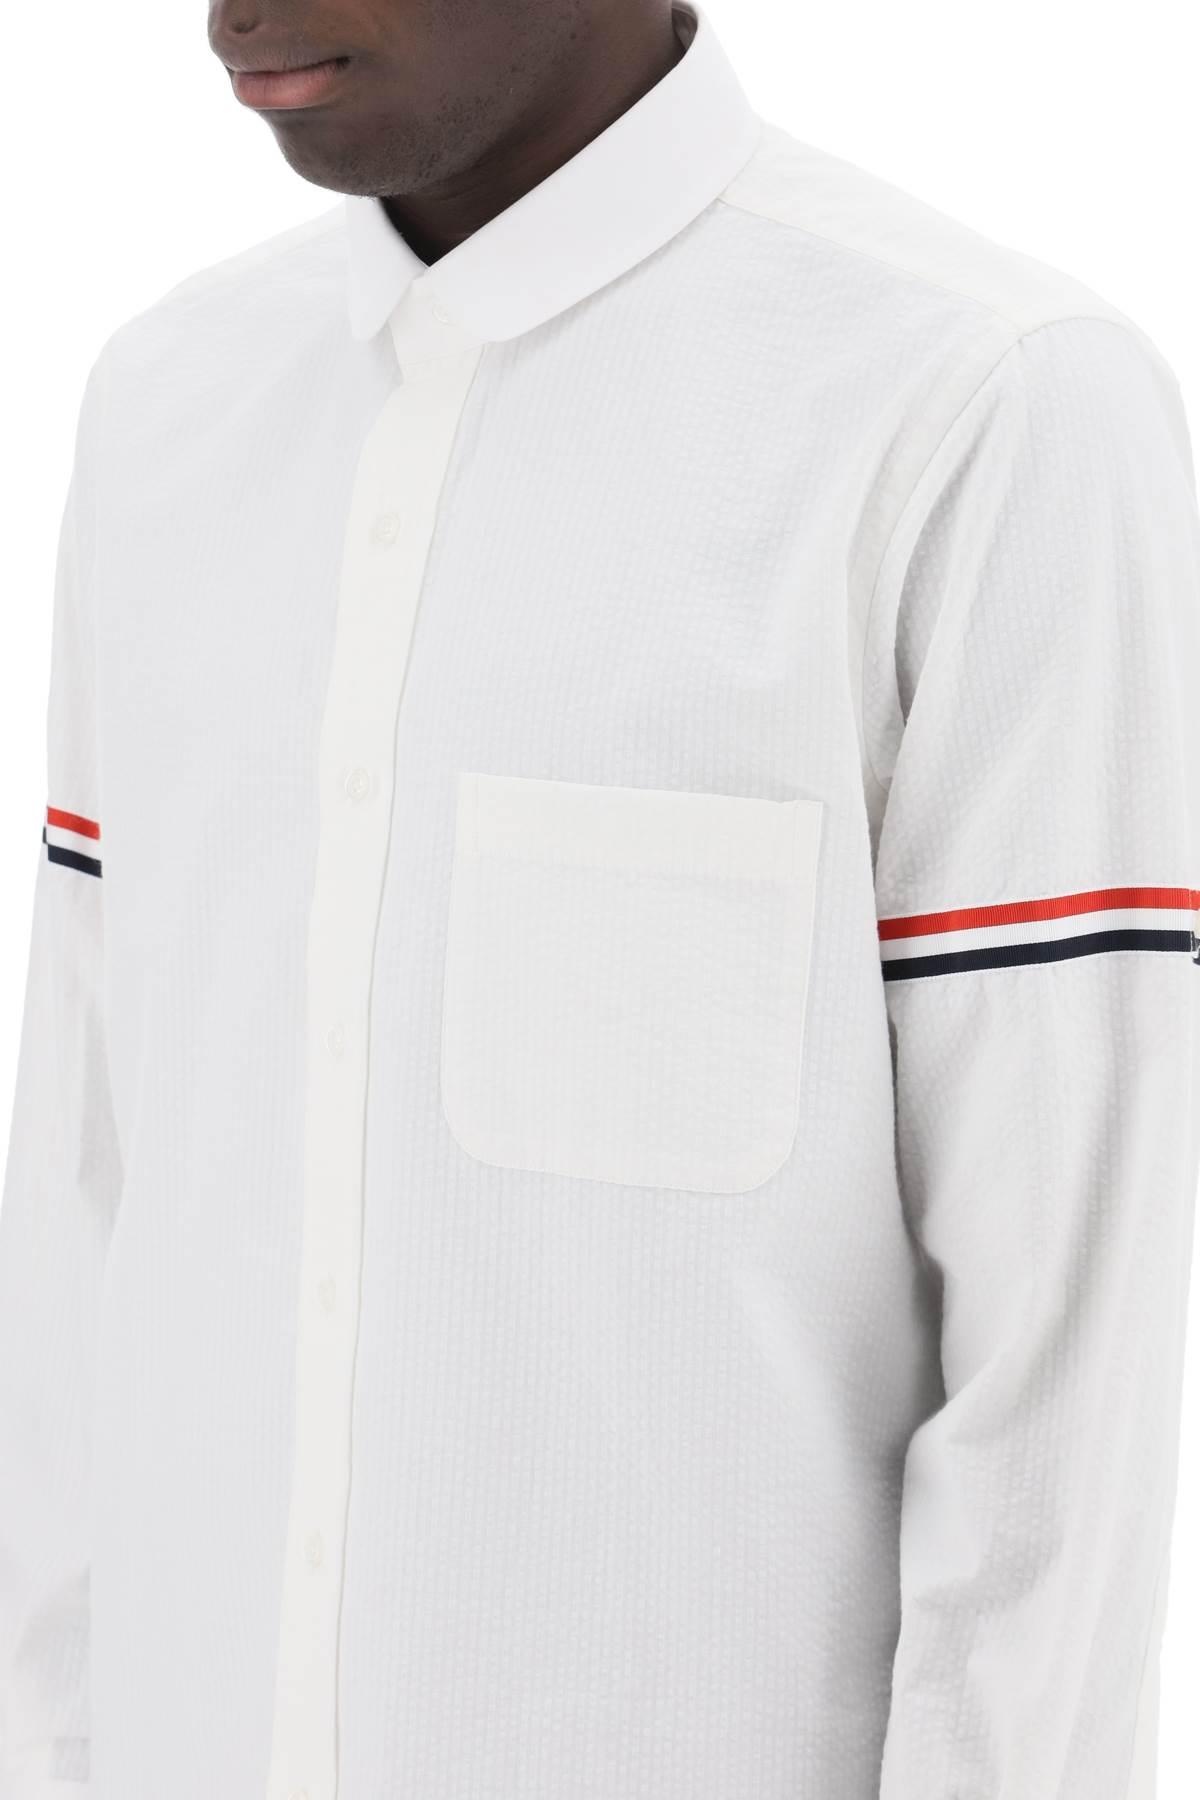 SEERSUCKER SHIRT WITH ROUNDED COLLAR - 5